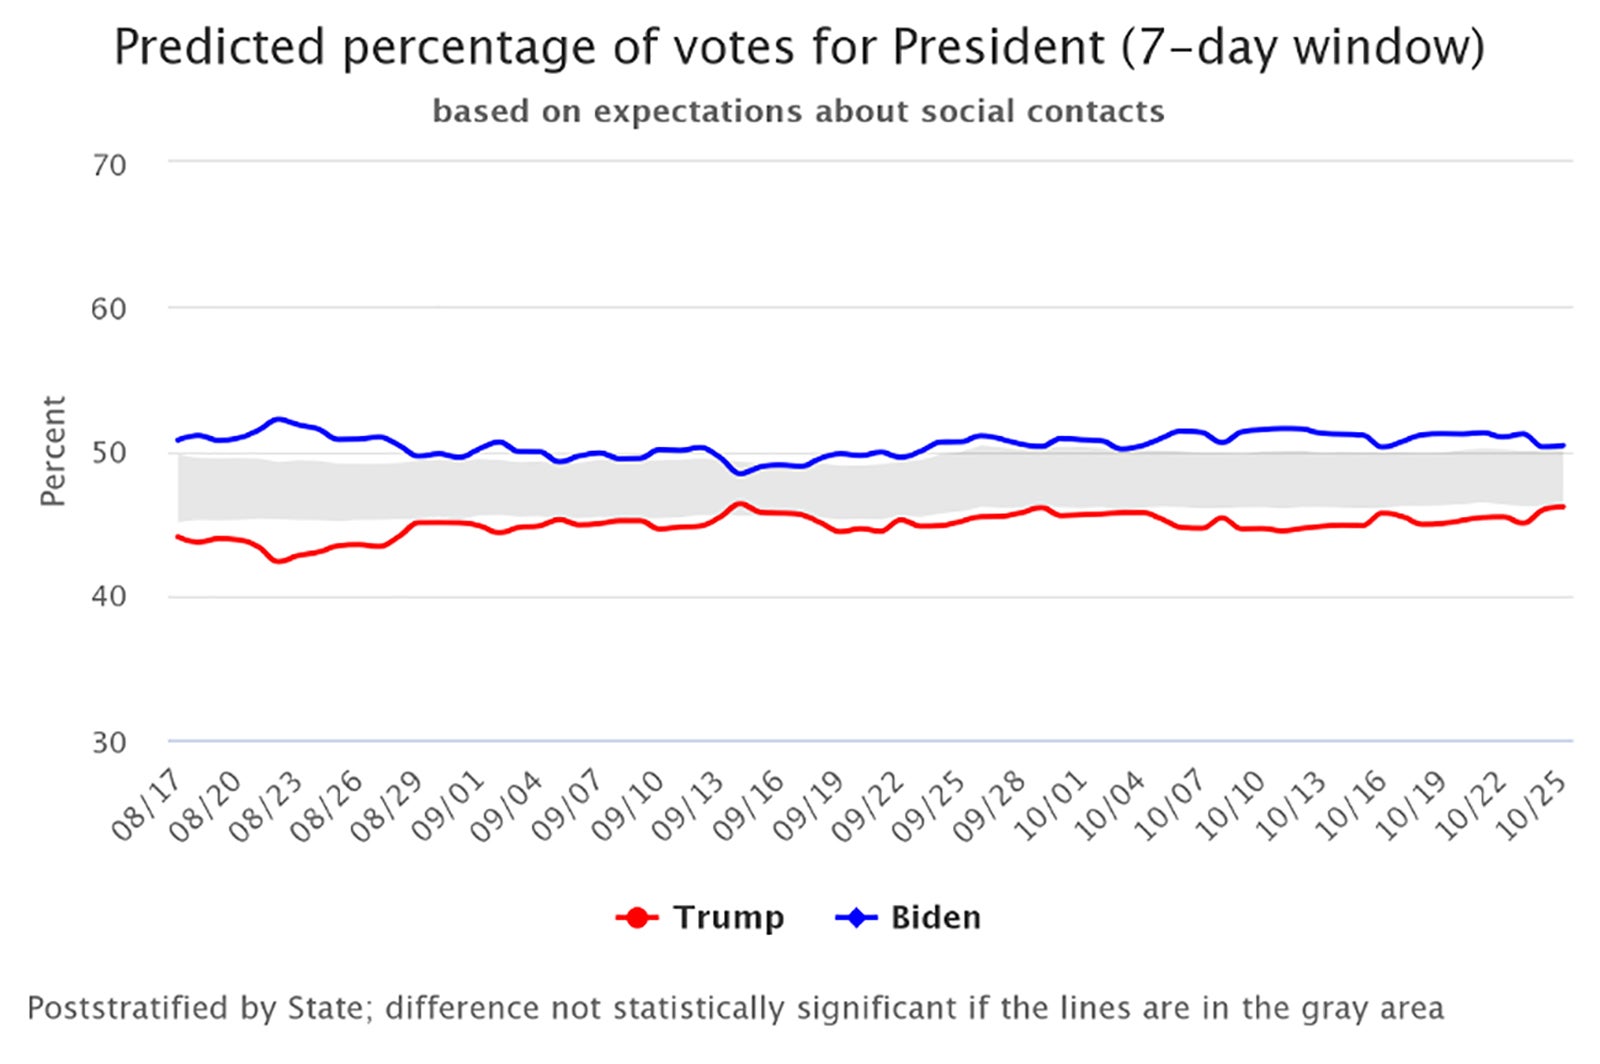 Graph shows predicted number of votes for President Trump (red line) and former Vice President Biden (blue line) based on poll respondents’ expectations of how their social contacts’ will vote.